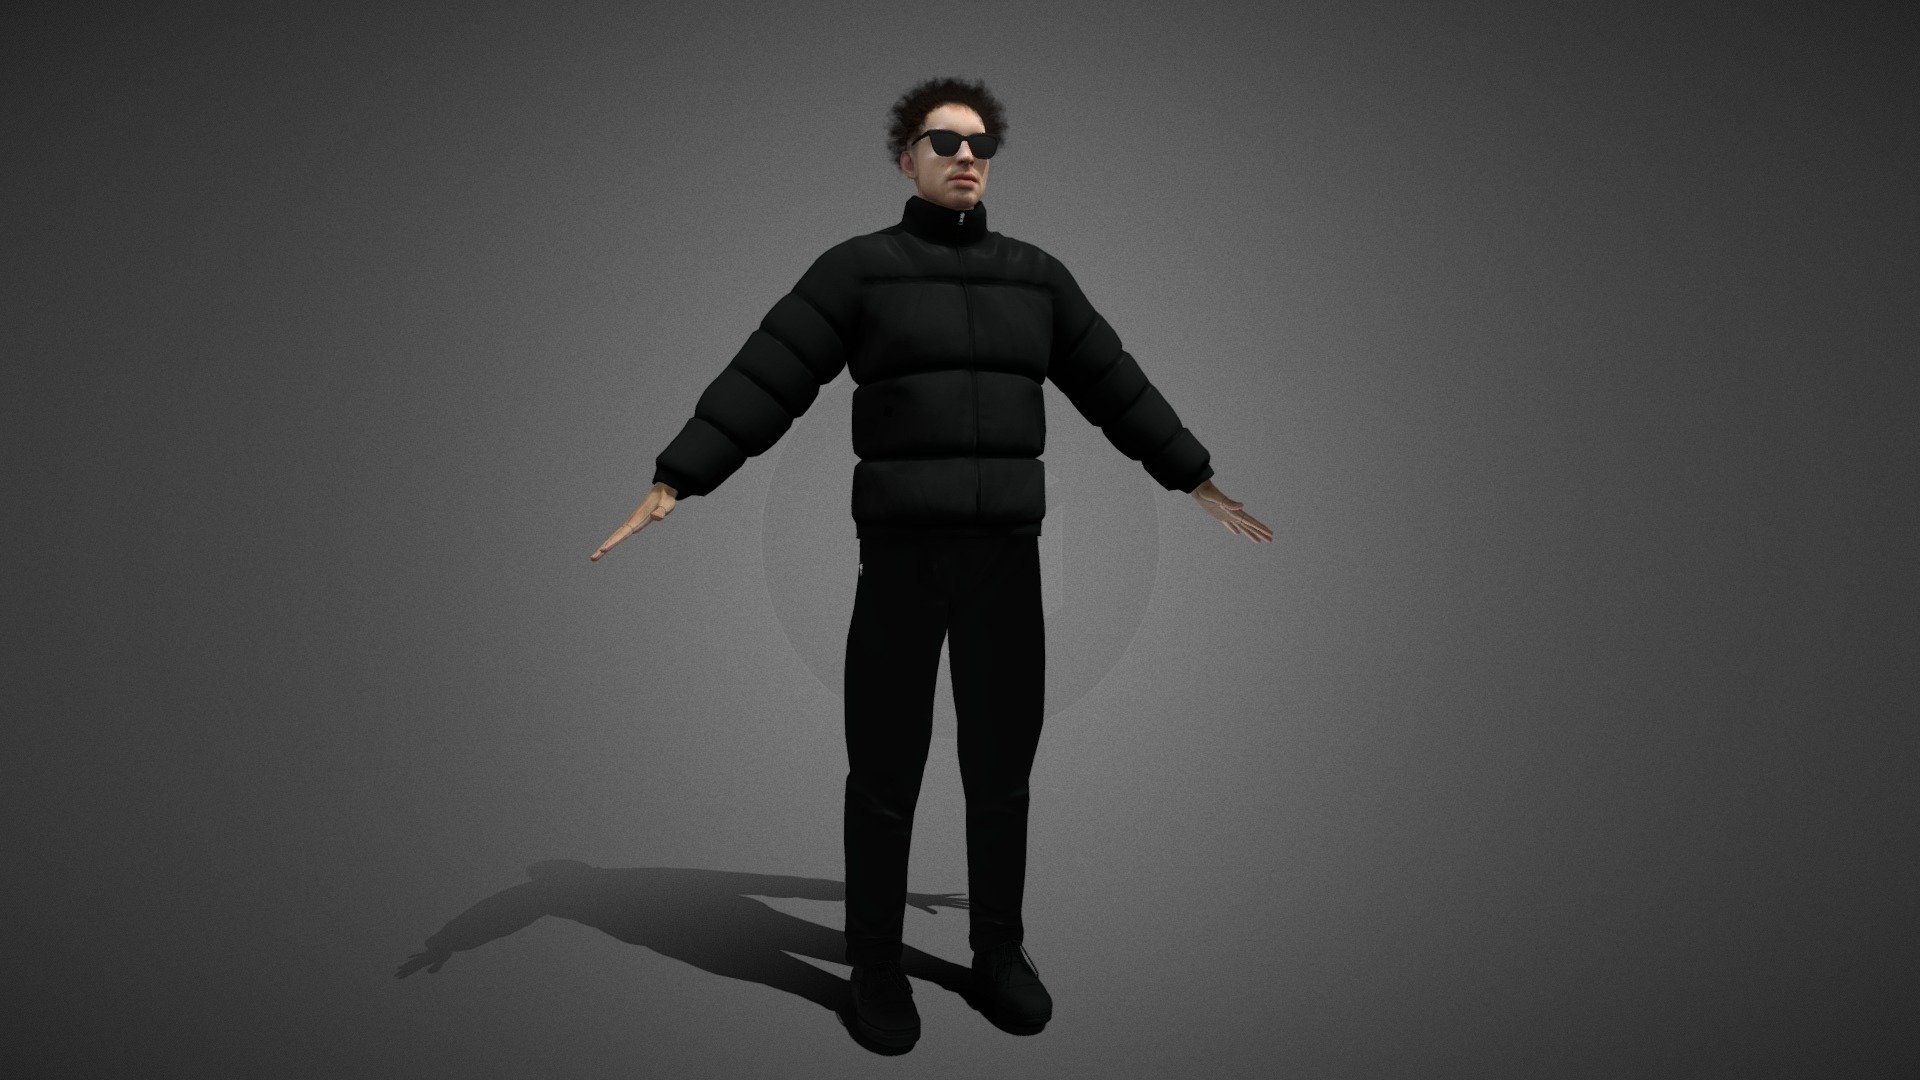 JeanJass pour le jeu video OKTOGONE

I can create 3D models of all famous artists or custom characters.  You can send me a message on Instagram if you're interested &ndash;&gt; https://www.instagram.com/valone.future/ - Jeanjass - 3D model by ValOne 3d model